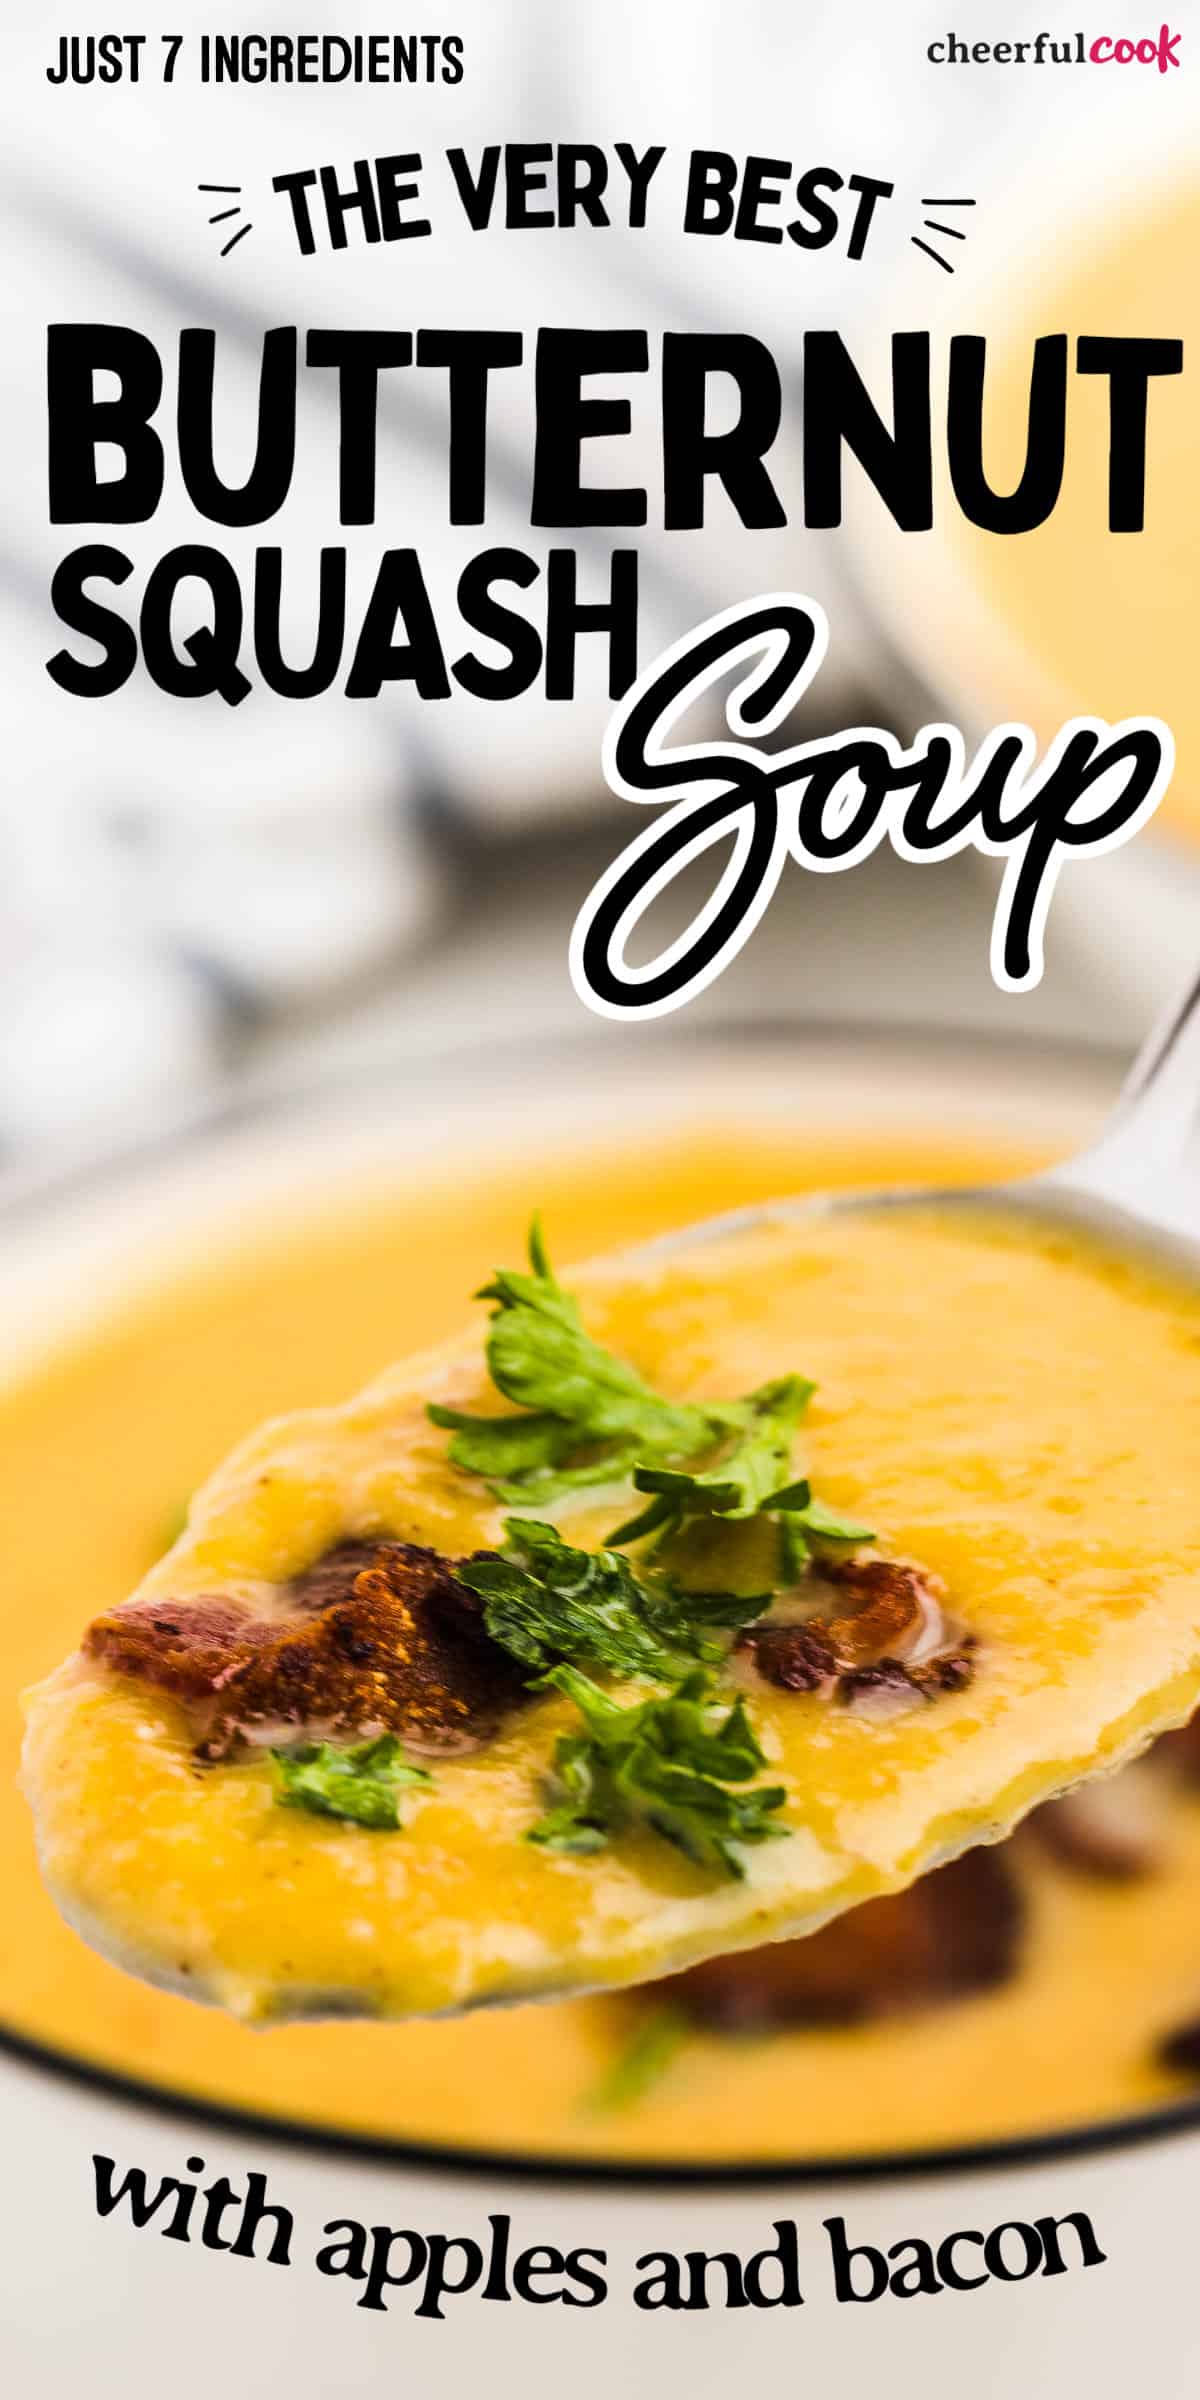 This sweet, savory, and earthy Butternut Squash Soup is irresistible. Butternut squash, sweet apples, bacon, and onion are simmered in a creamy broth until tender and blended to smooth perfection. #cheerfulcook #butternutsquash #butternutsquashsoup #soup #fallrecipe #bacon #apple #easy via @cheerfulcook